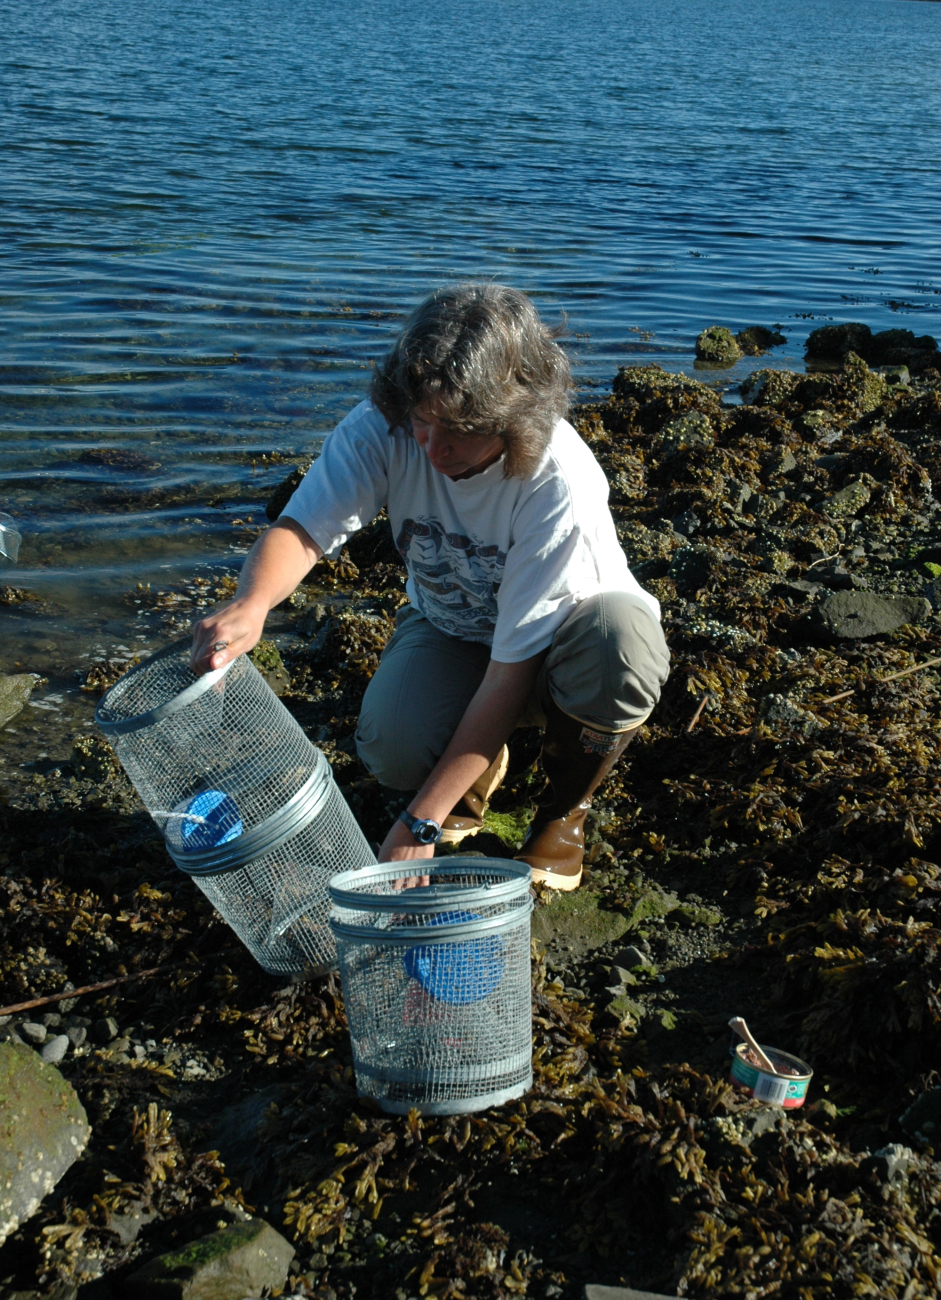 Mary Sue Brancato, Resource Protection Specialist for the OlympicCoast National Marine Sanctuary, is setting a trap to monitor for green crab,an invasive species